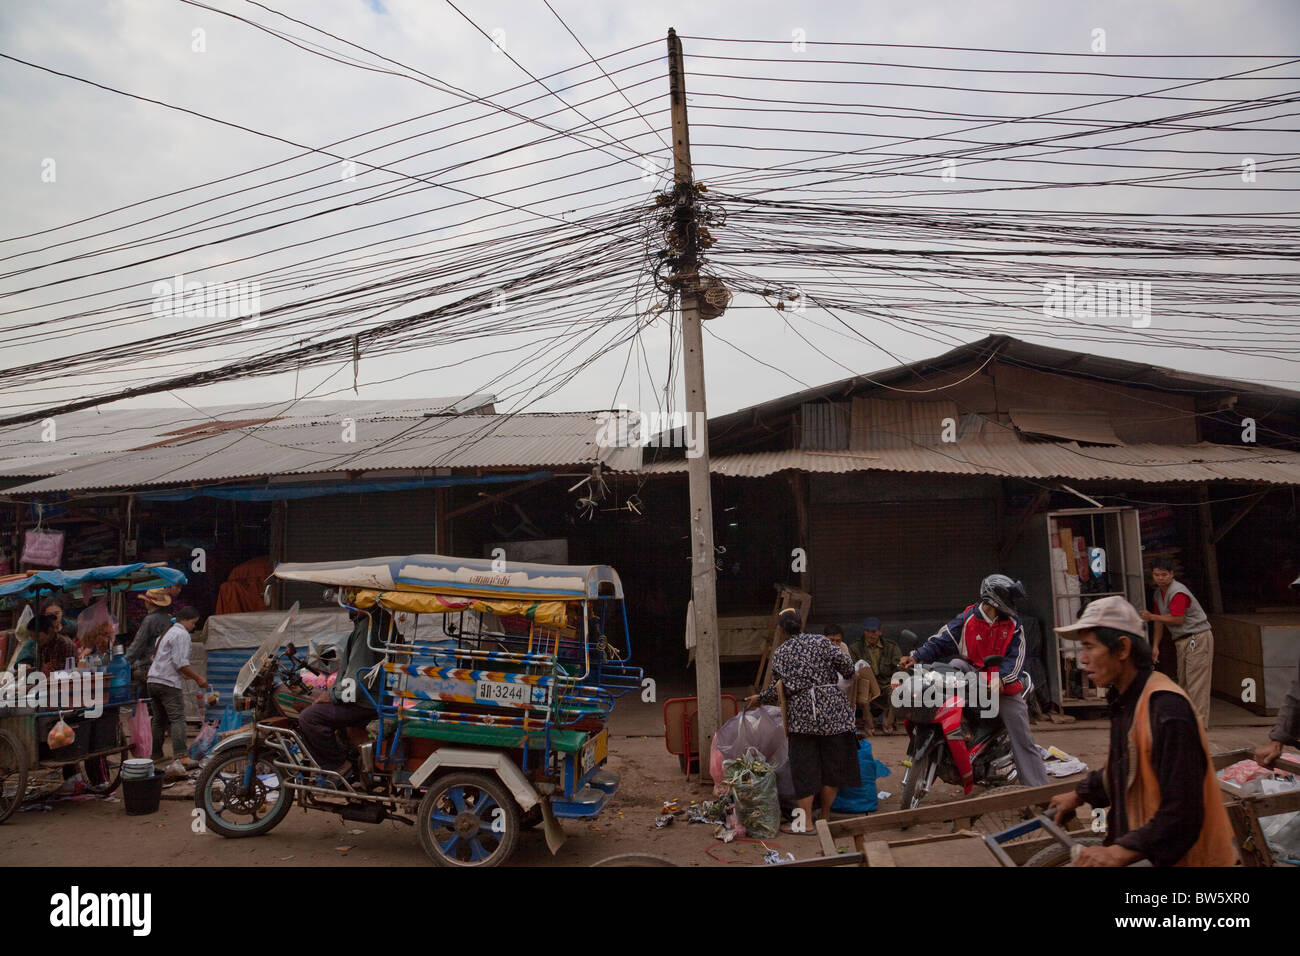 A confusion of telephone wires over Khua Din,the day market, in Vientiane, capital of Laos. Stock Photo